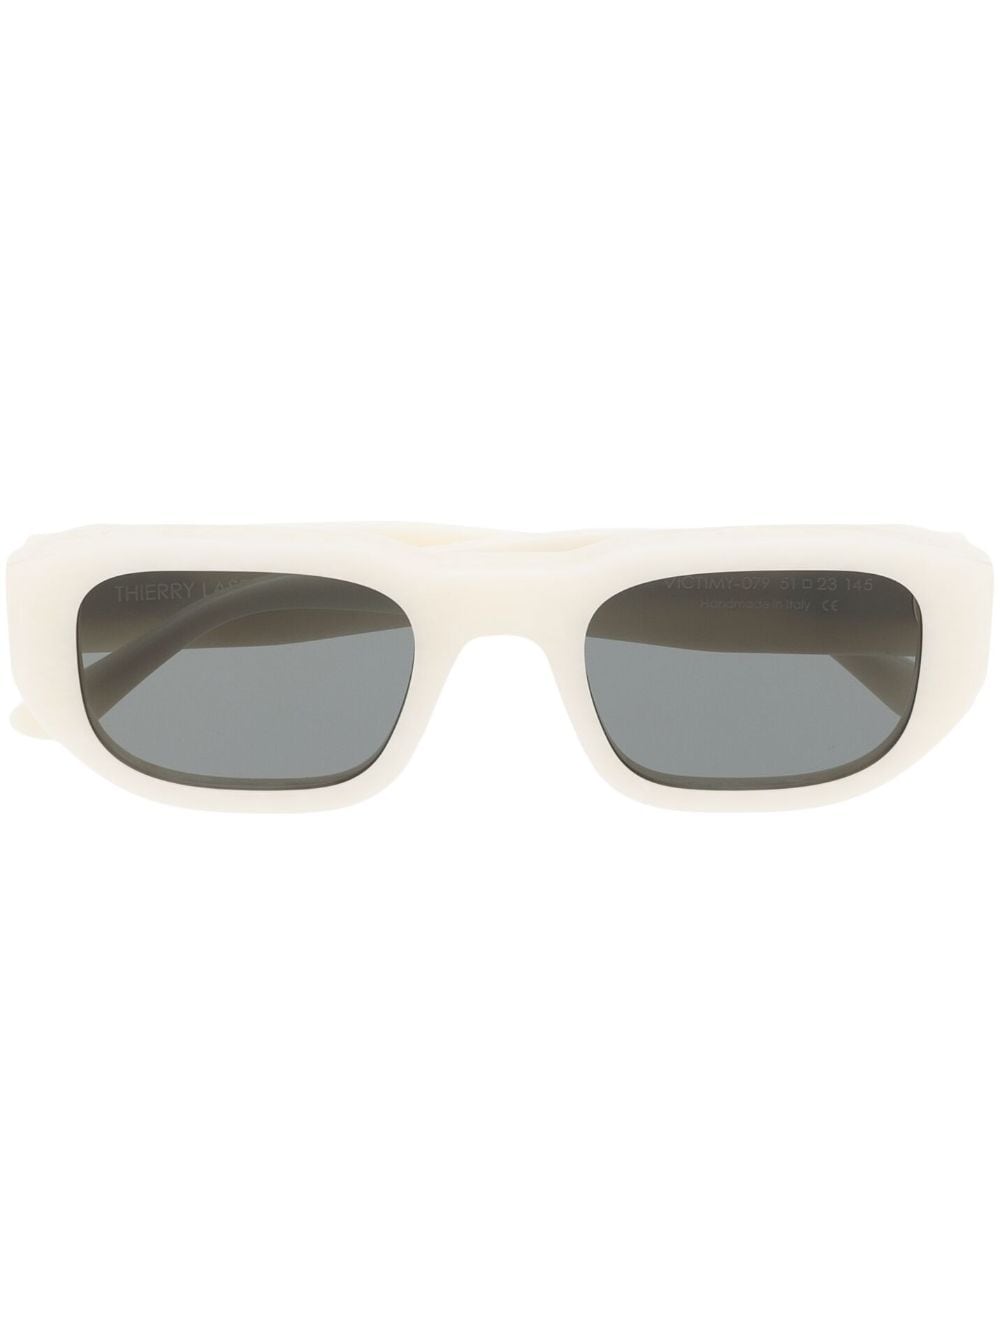 Thierry Lasry square-frame sunglasses - White von Thierry Lasry